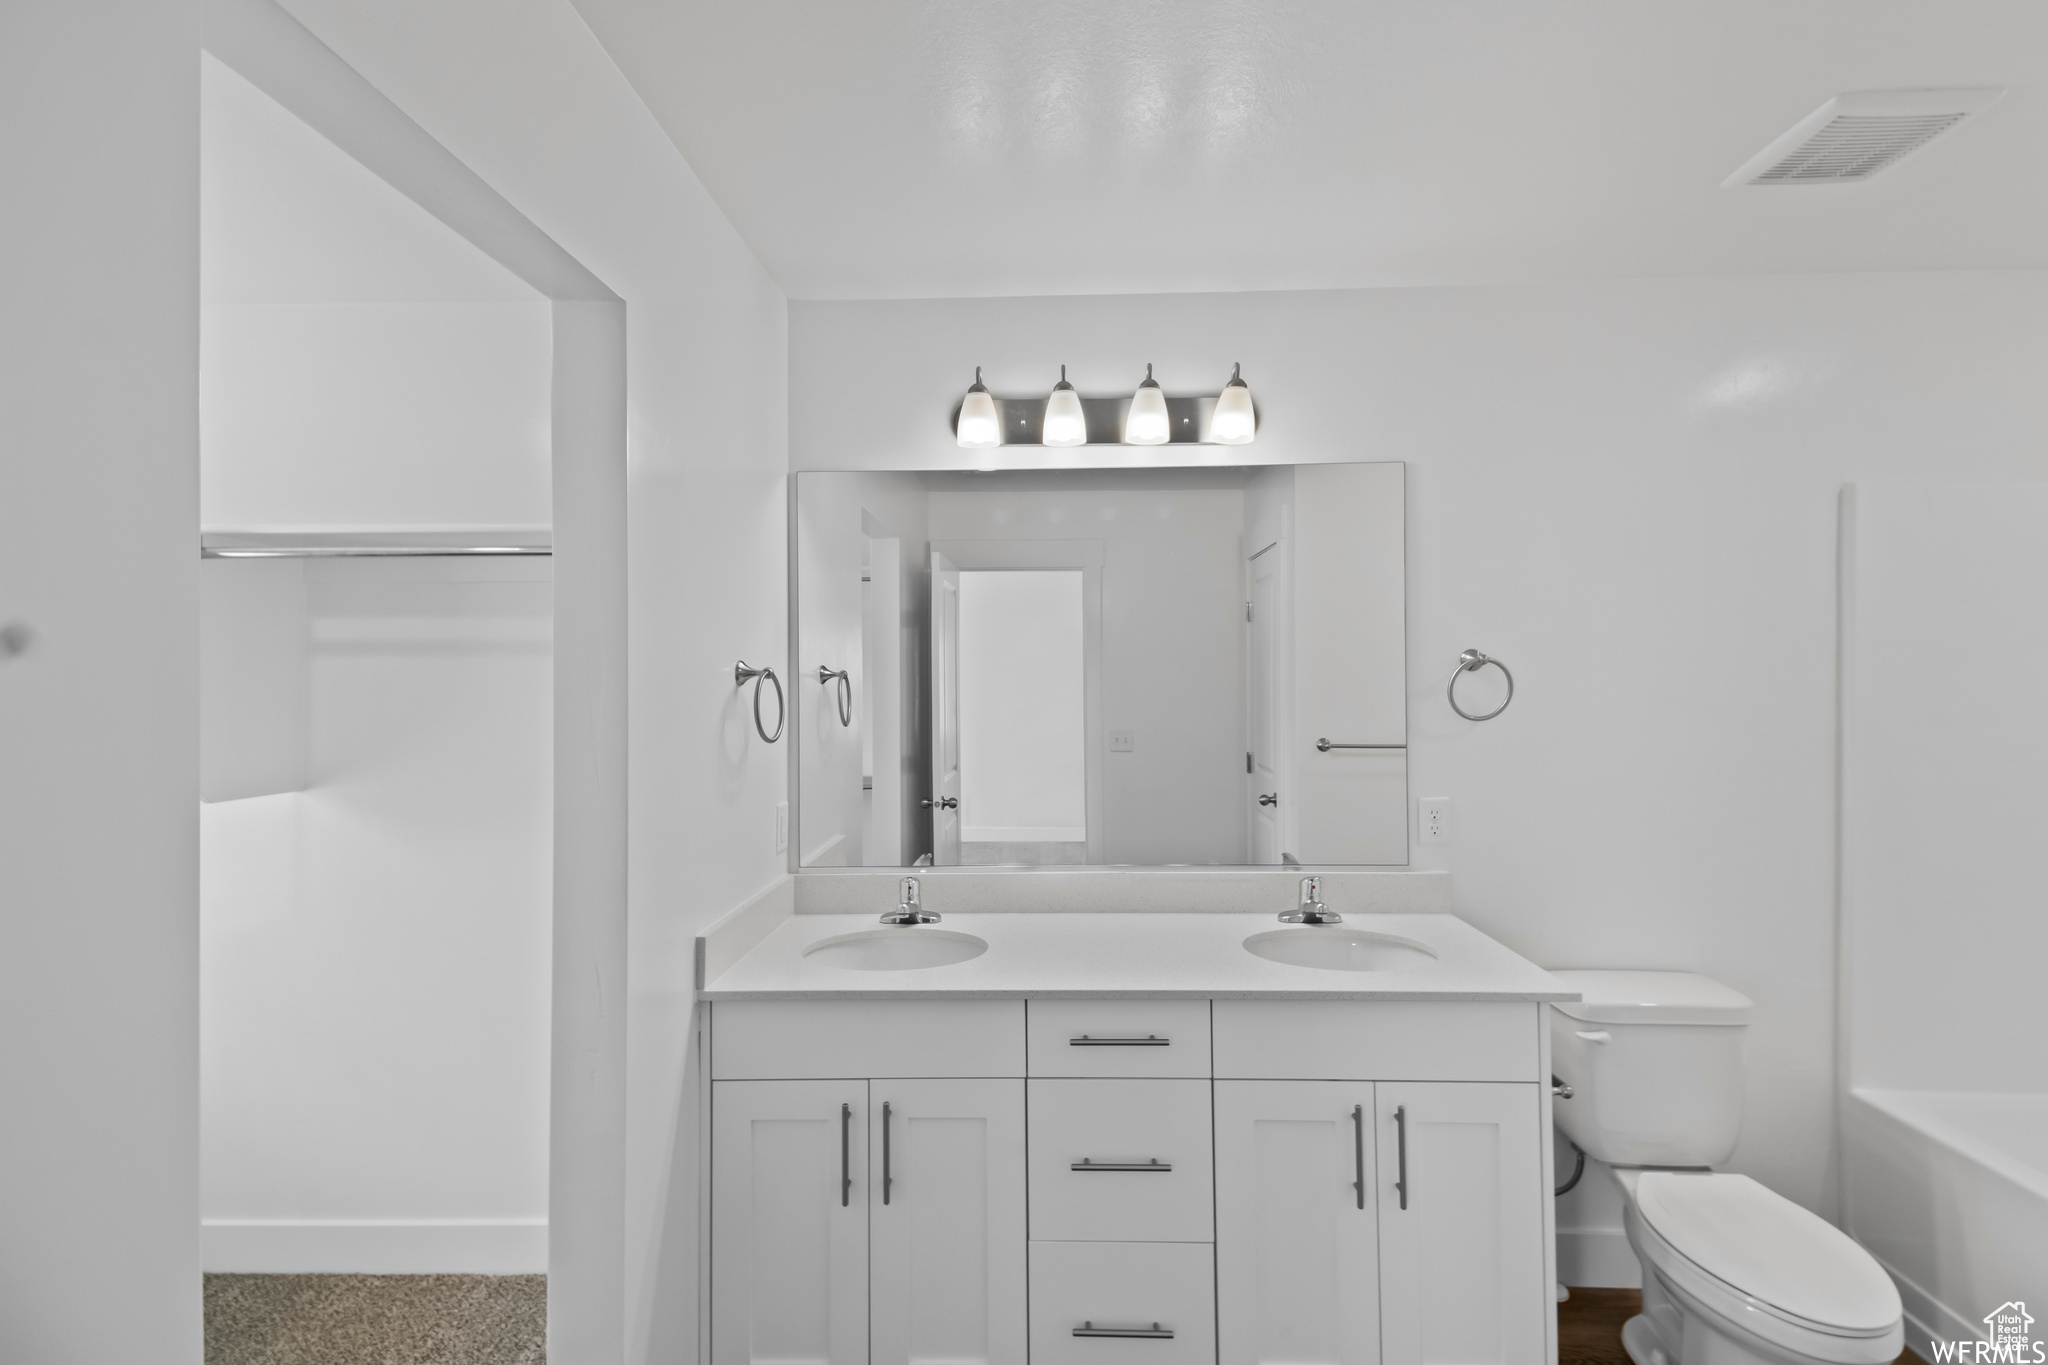 Full bathroom featuring toilet, washtub / shower combination, dual sinks, and large vanity